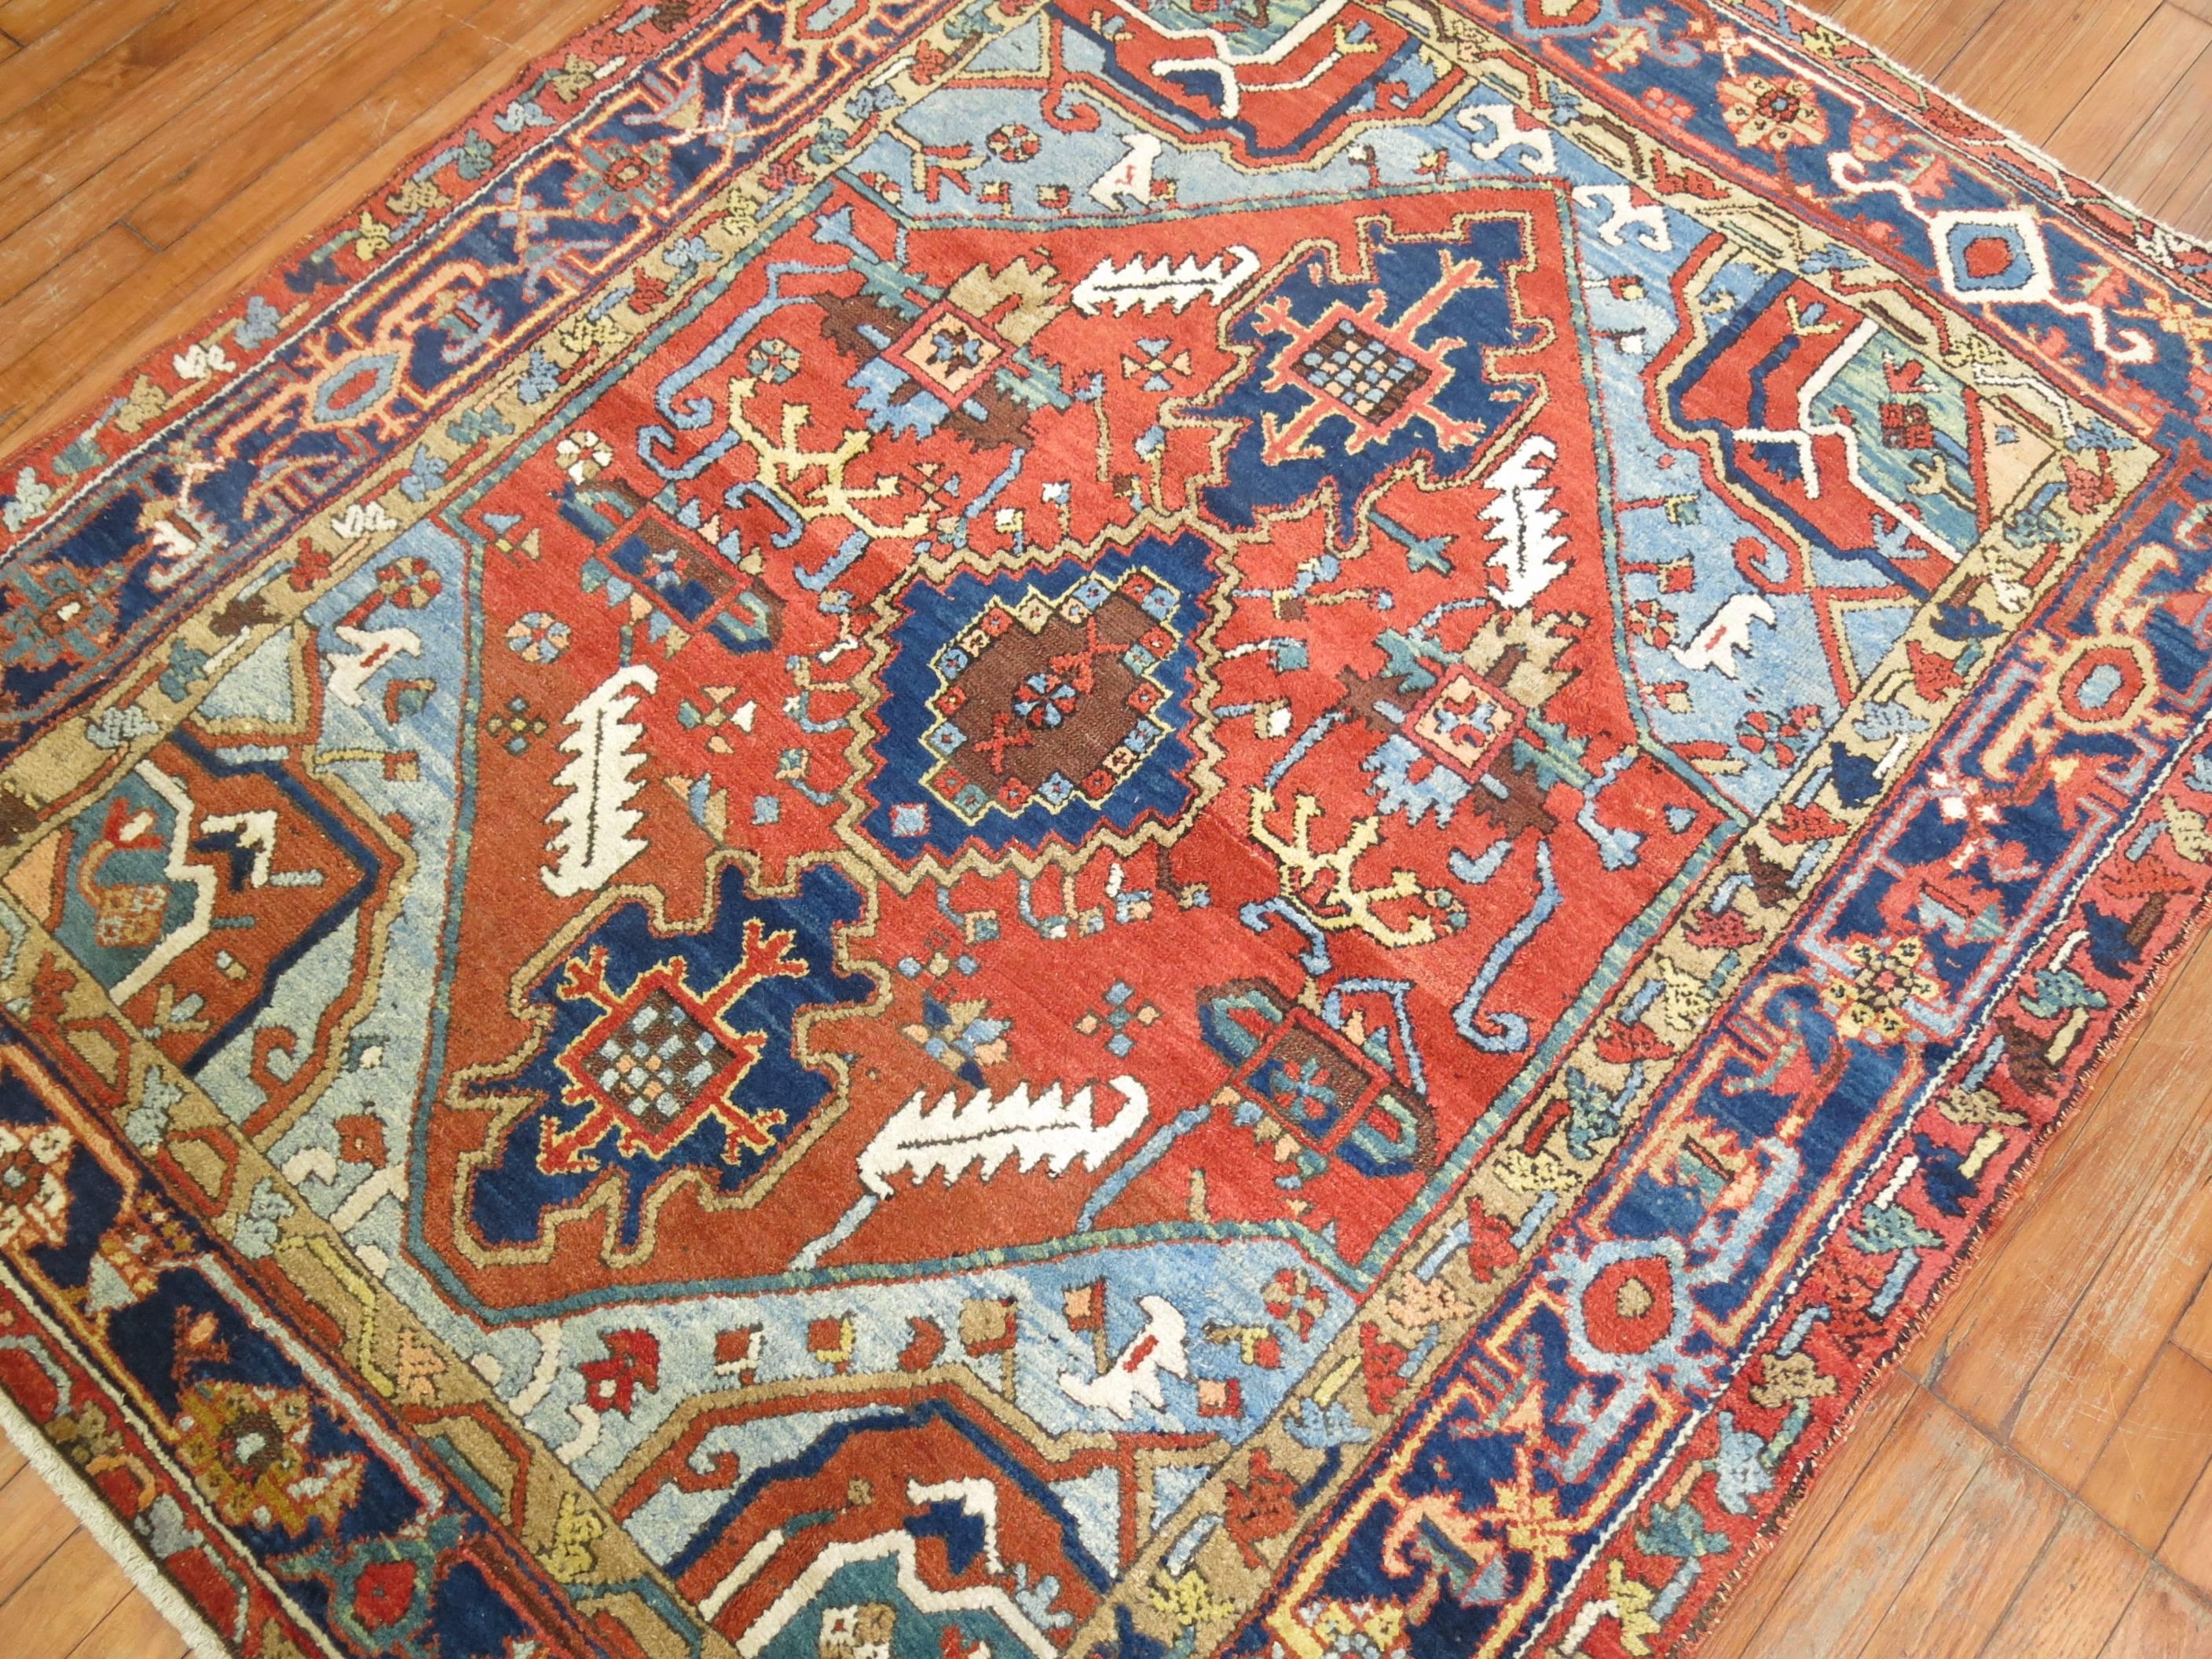 Rare compact square size Persian Heriz rug.

Heriz carpets are beloved for their versatility. Their geometry complements modern furnishings and their warm colors and artistic depth enhances antiques of all kinds. Their richness of color and